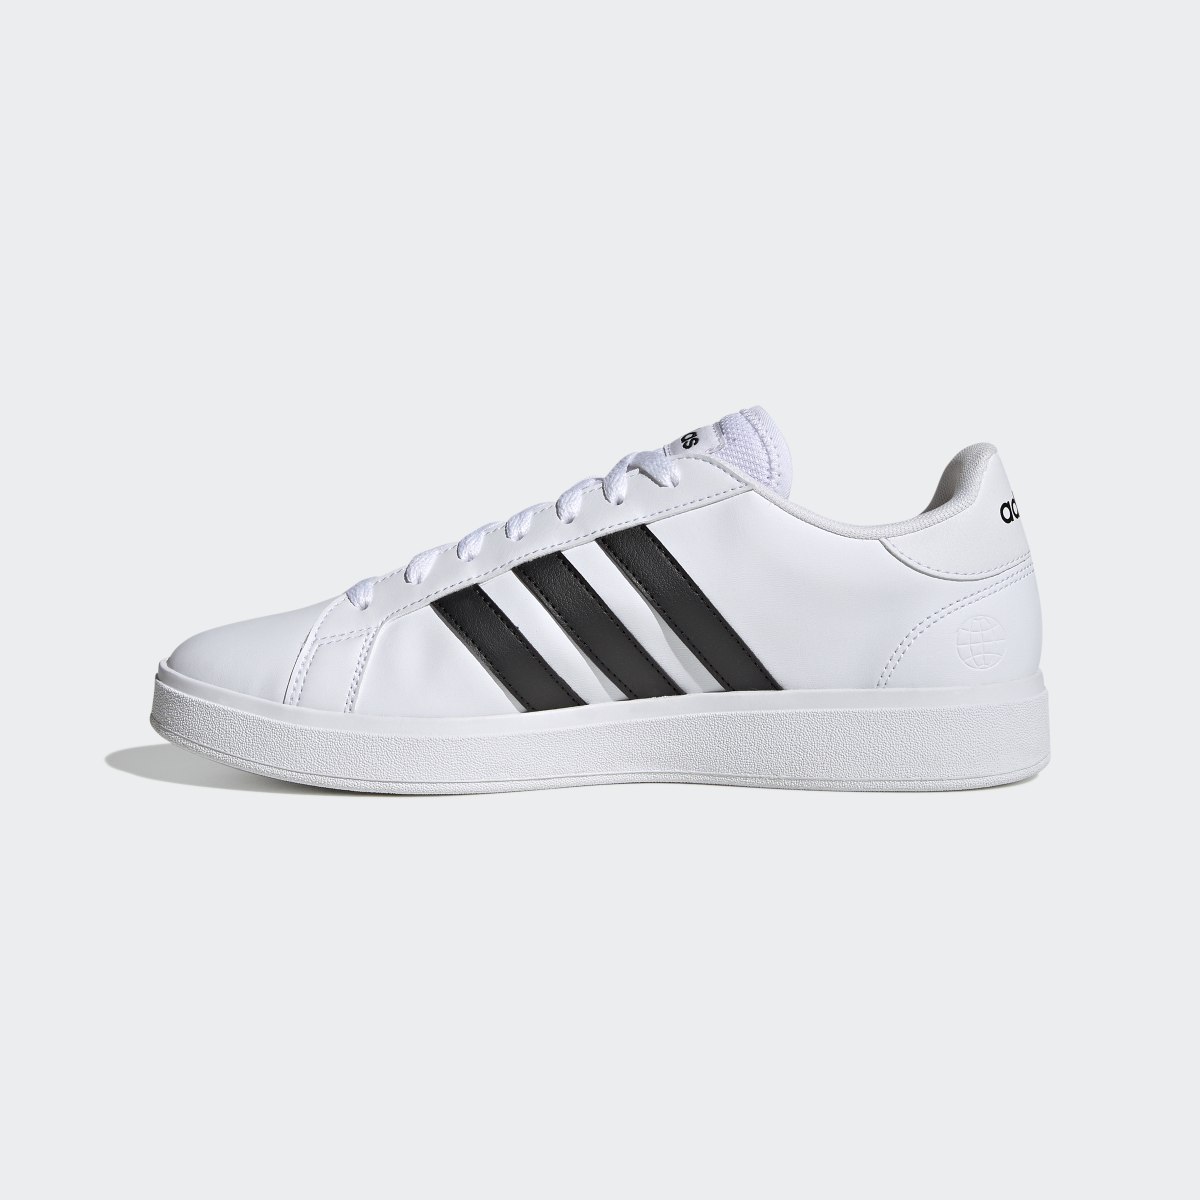 Adidas Grand Court TD Lifestyle Court Casual Shoes. 7